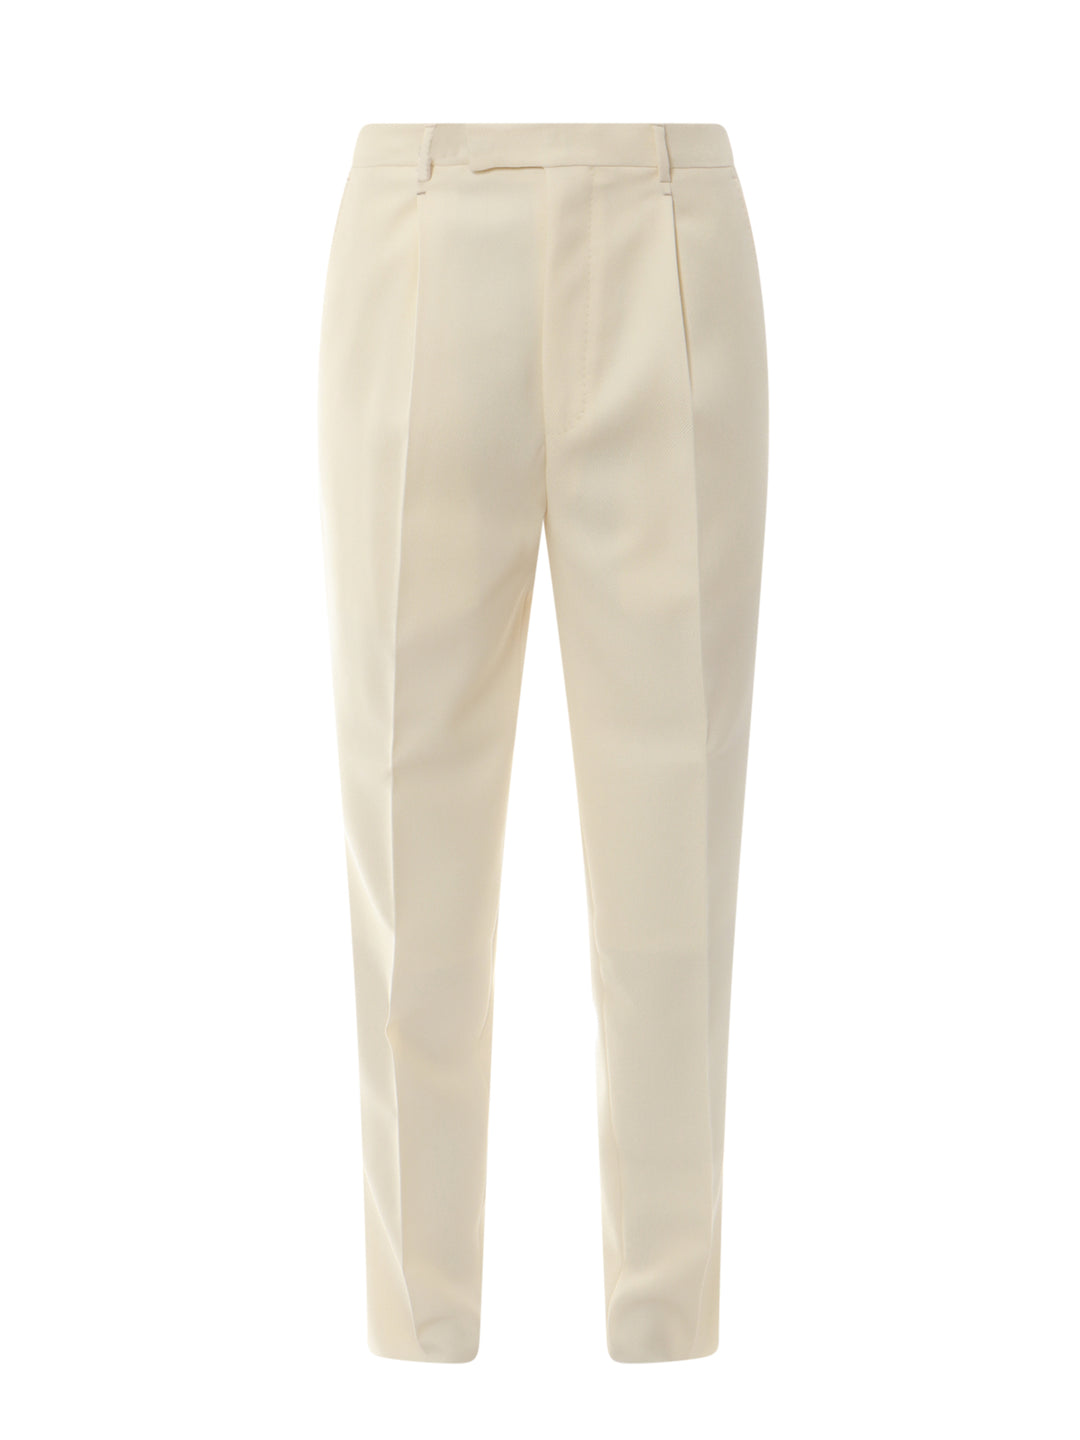 Pantalone Pleated Fit  in lana